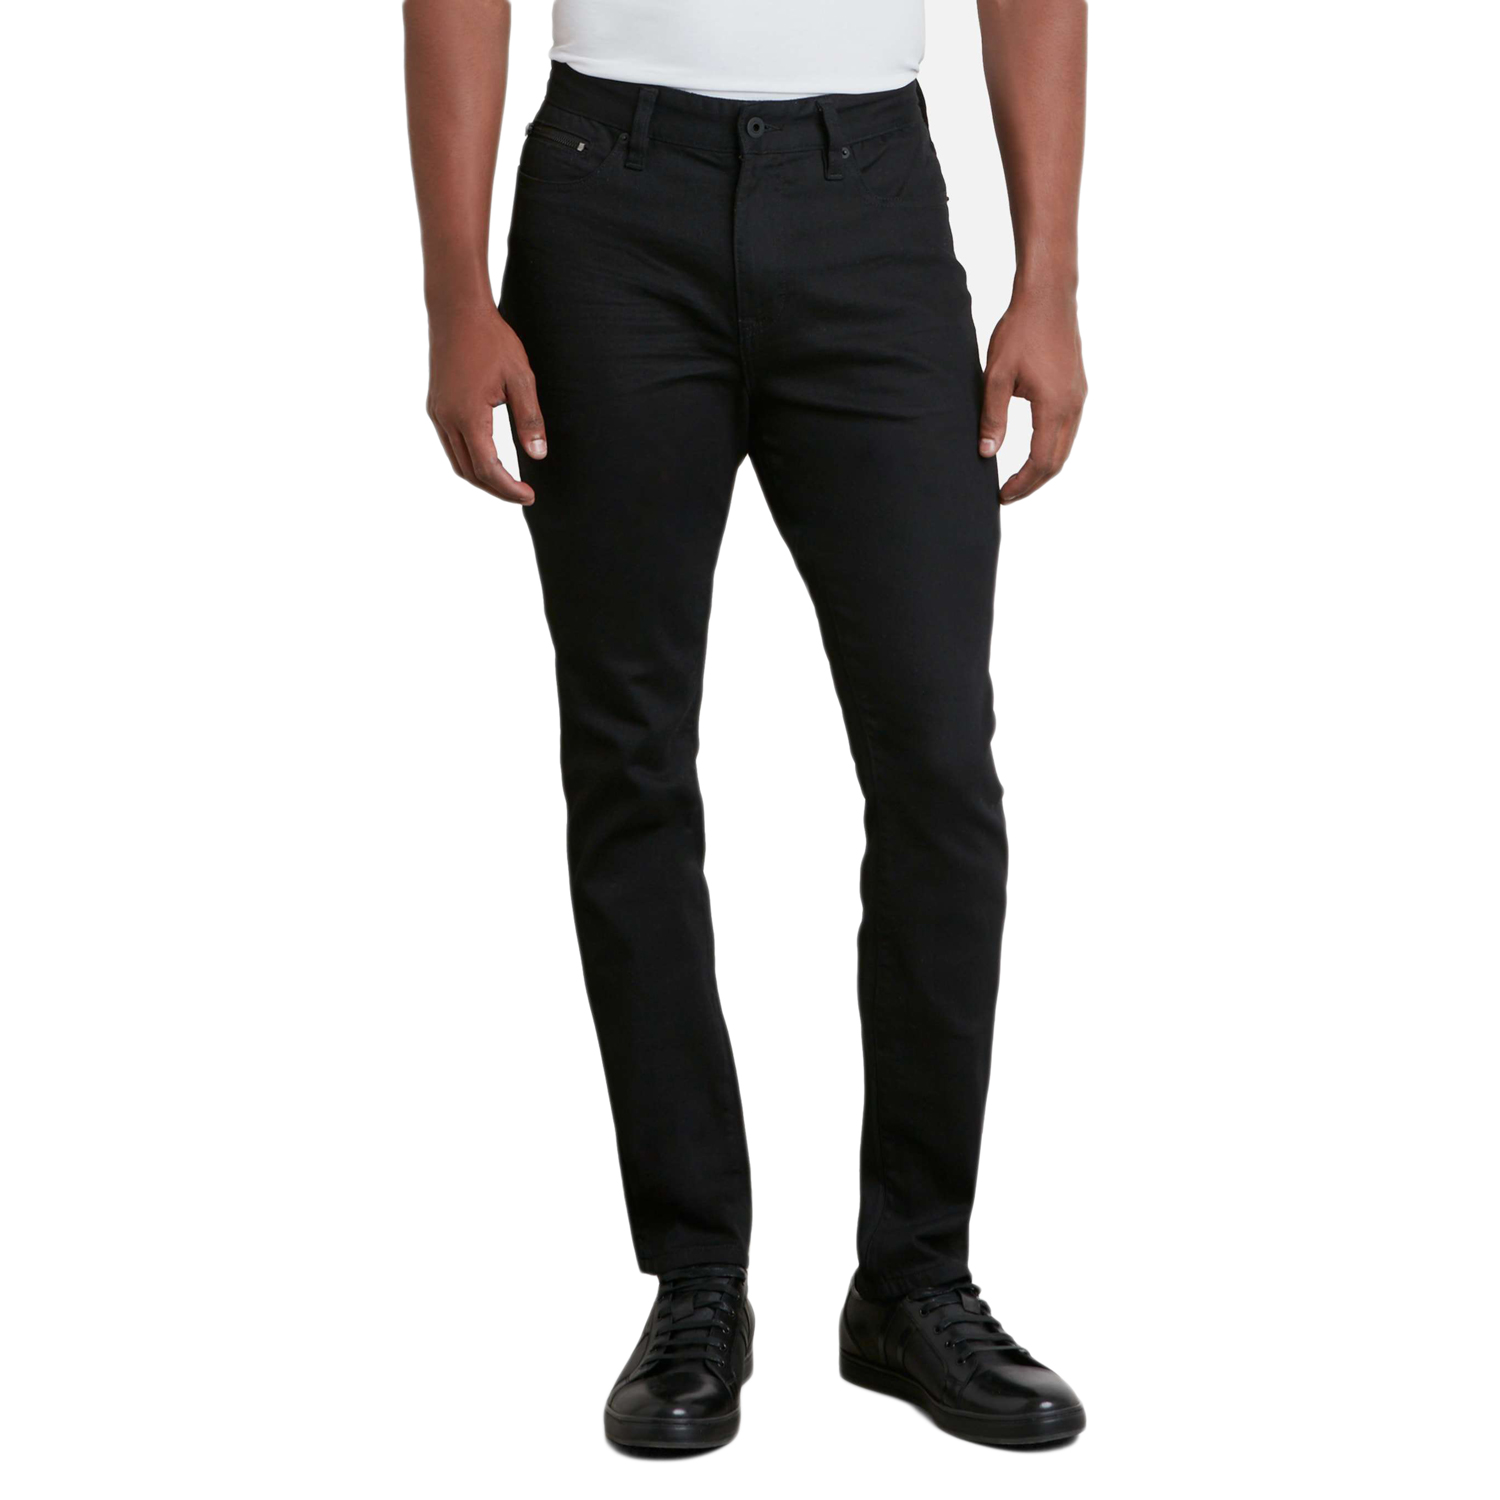 kenneth cole reaction stretch jeans